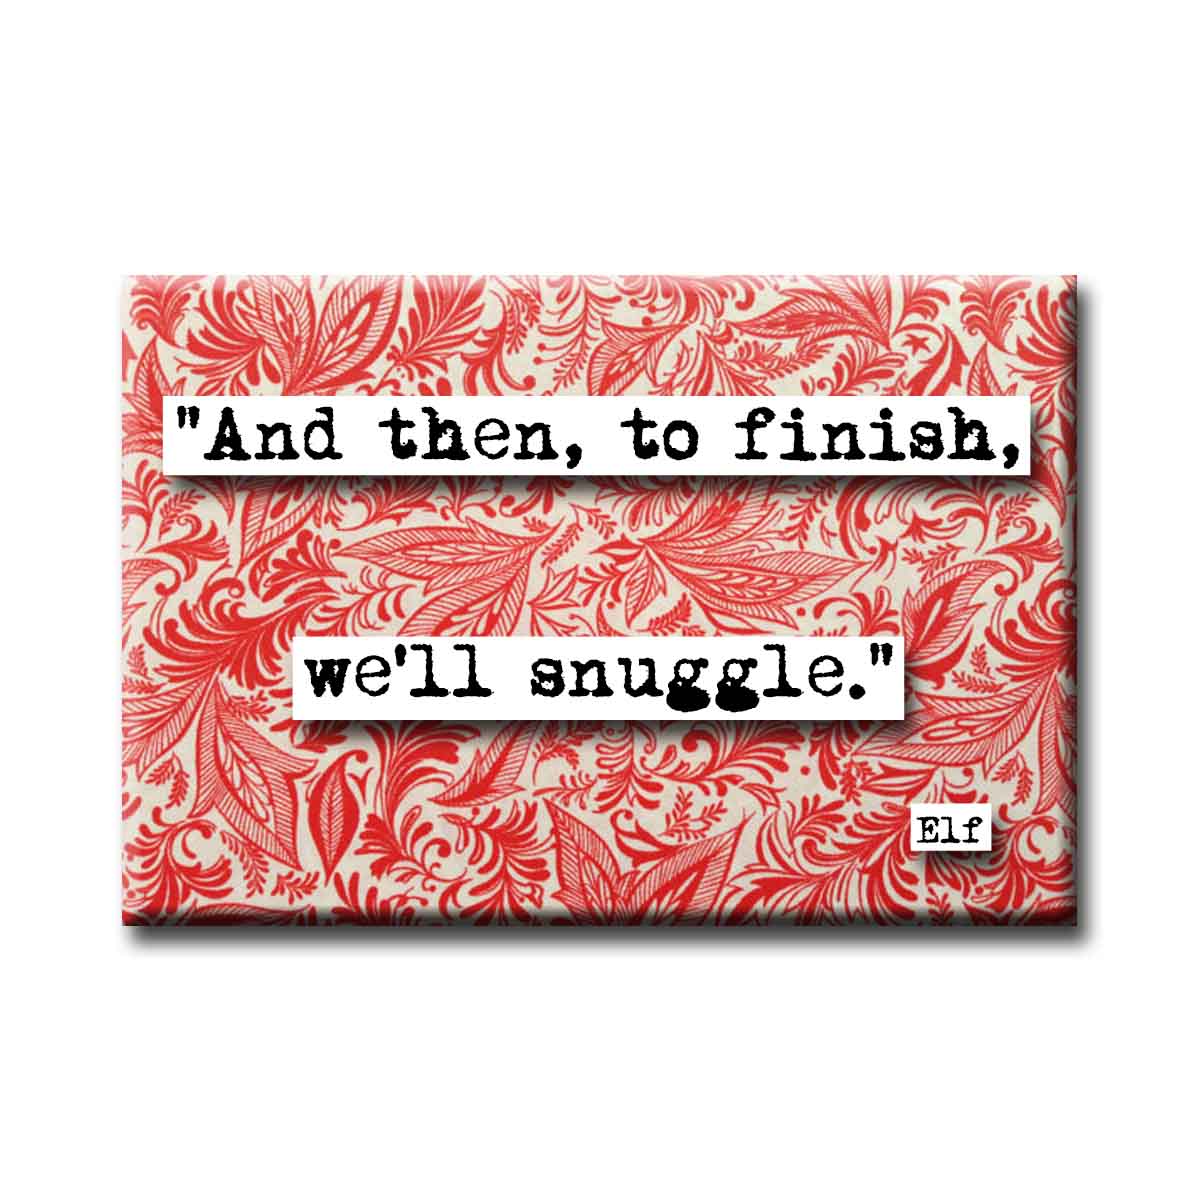 Elf And to Finish We Will Snuggle Quote Magnet (no.39c)